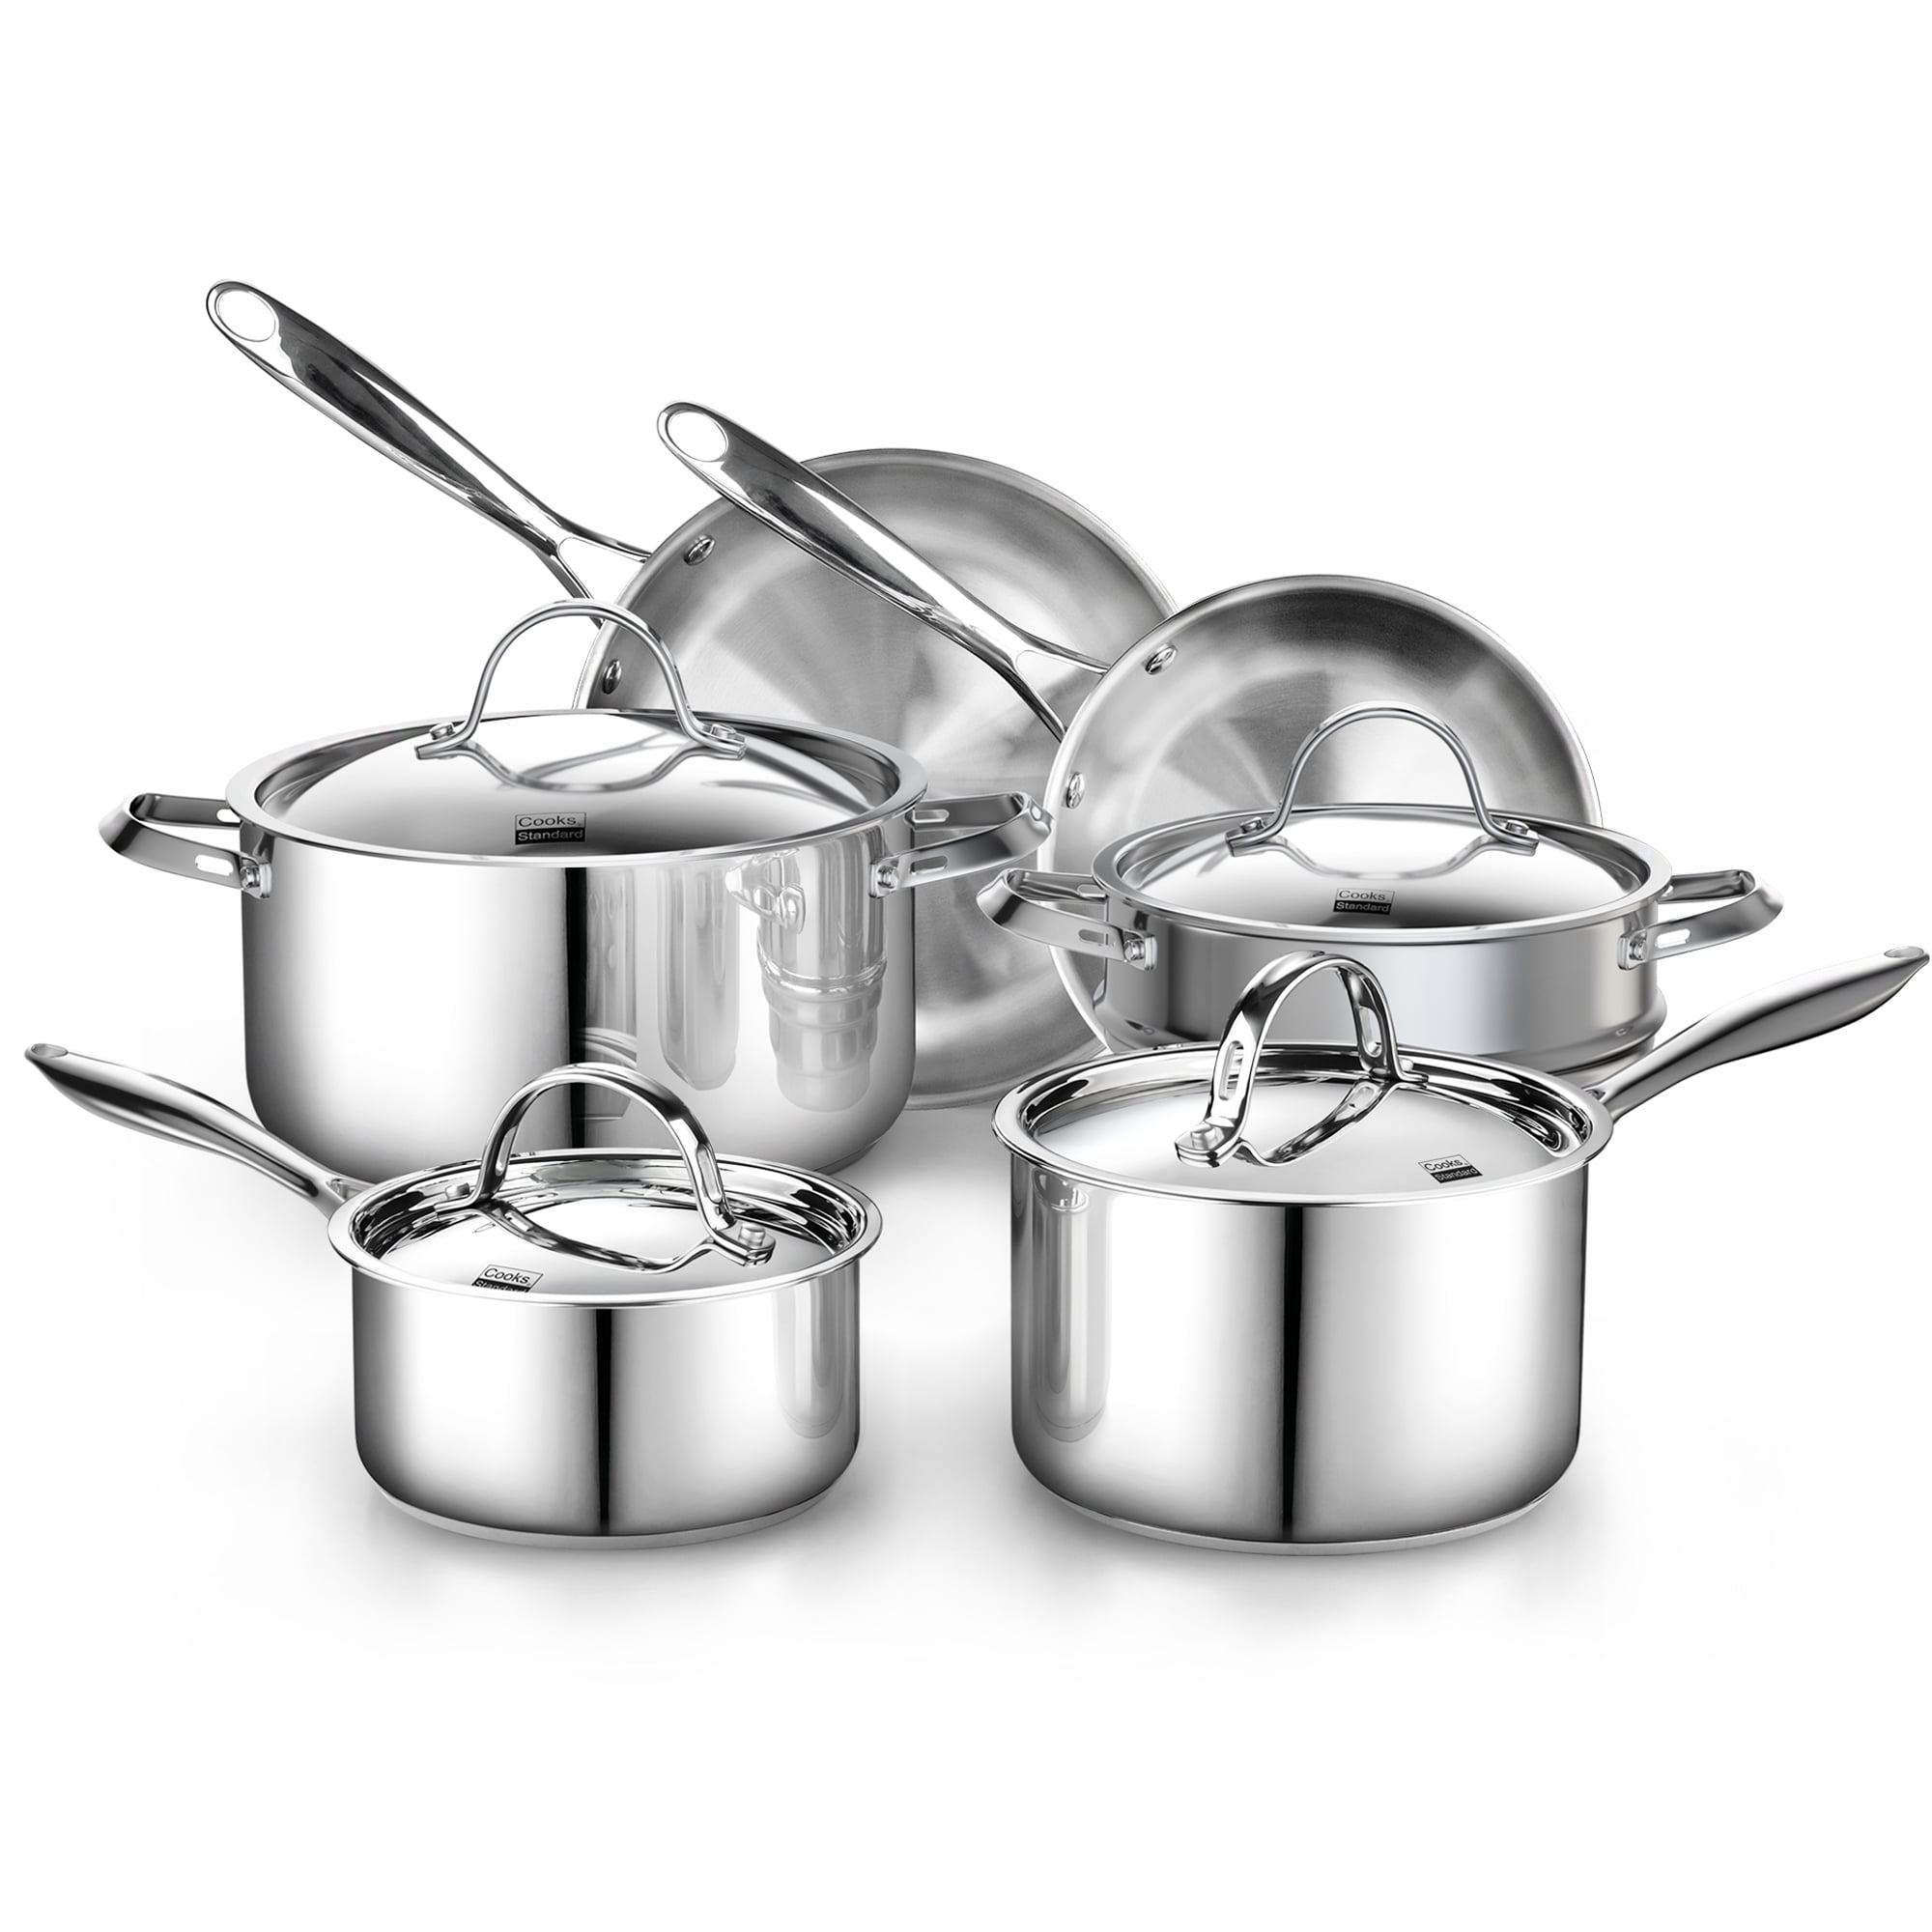 10-Piece Stainless Cookware Set CWSETL-ST-10